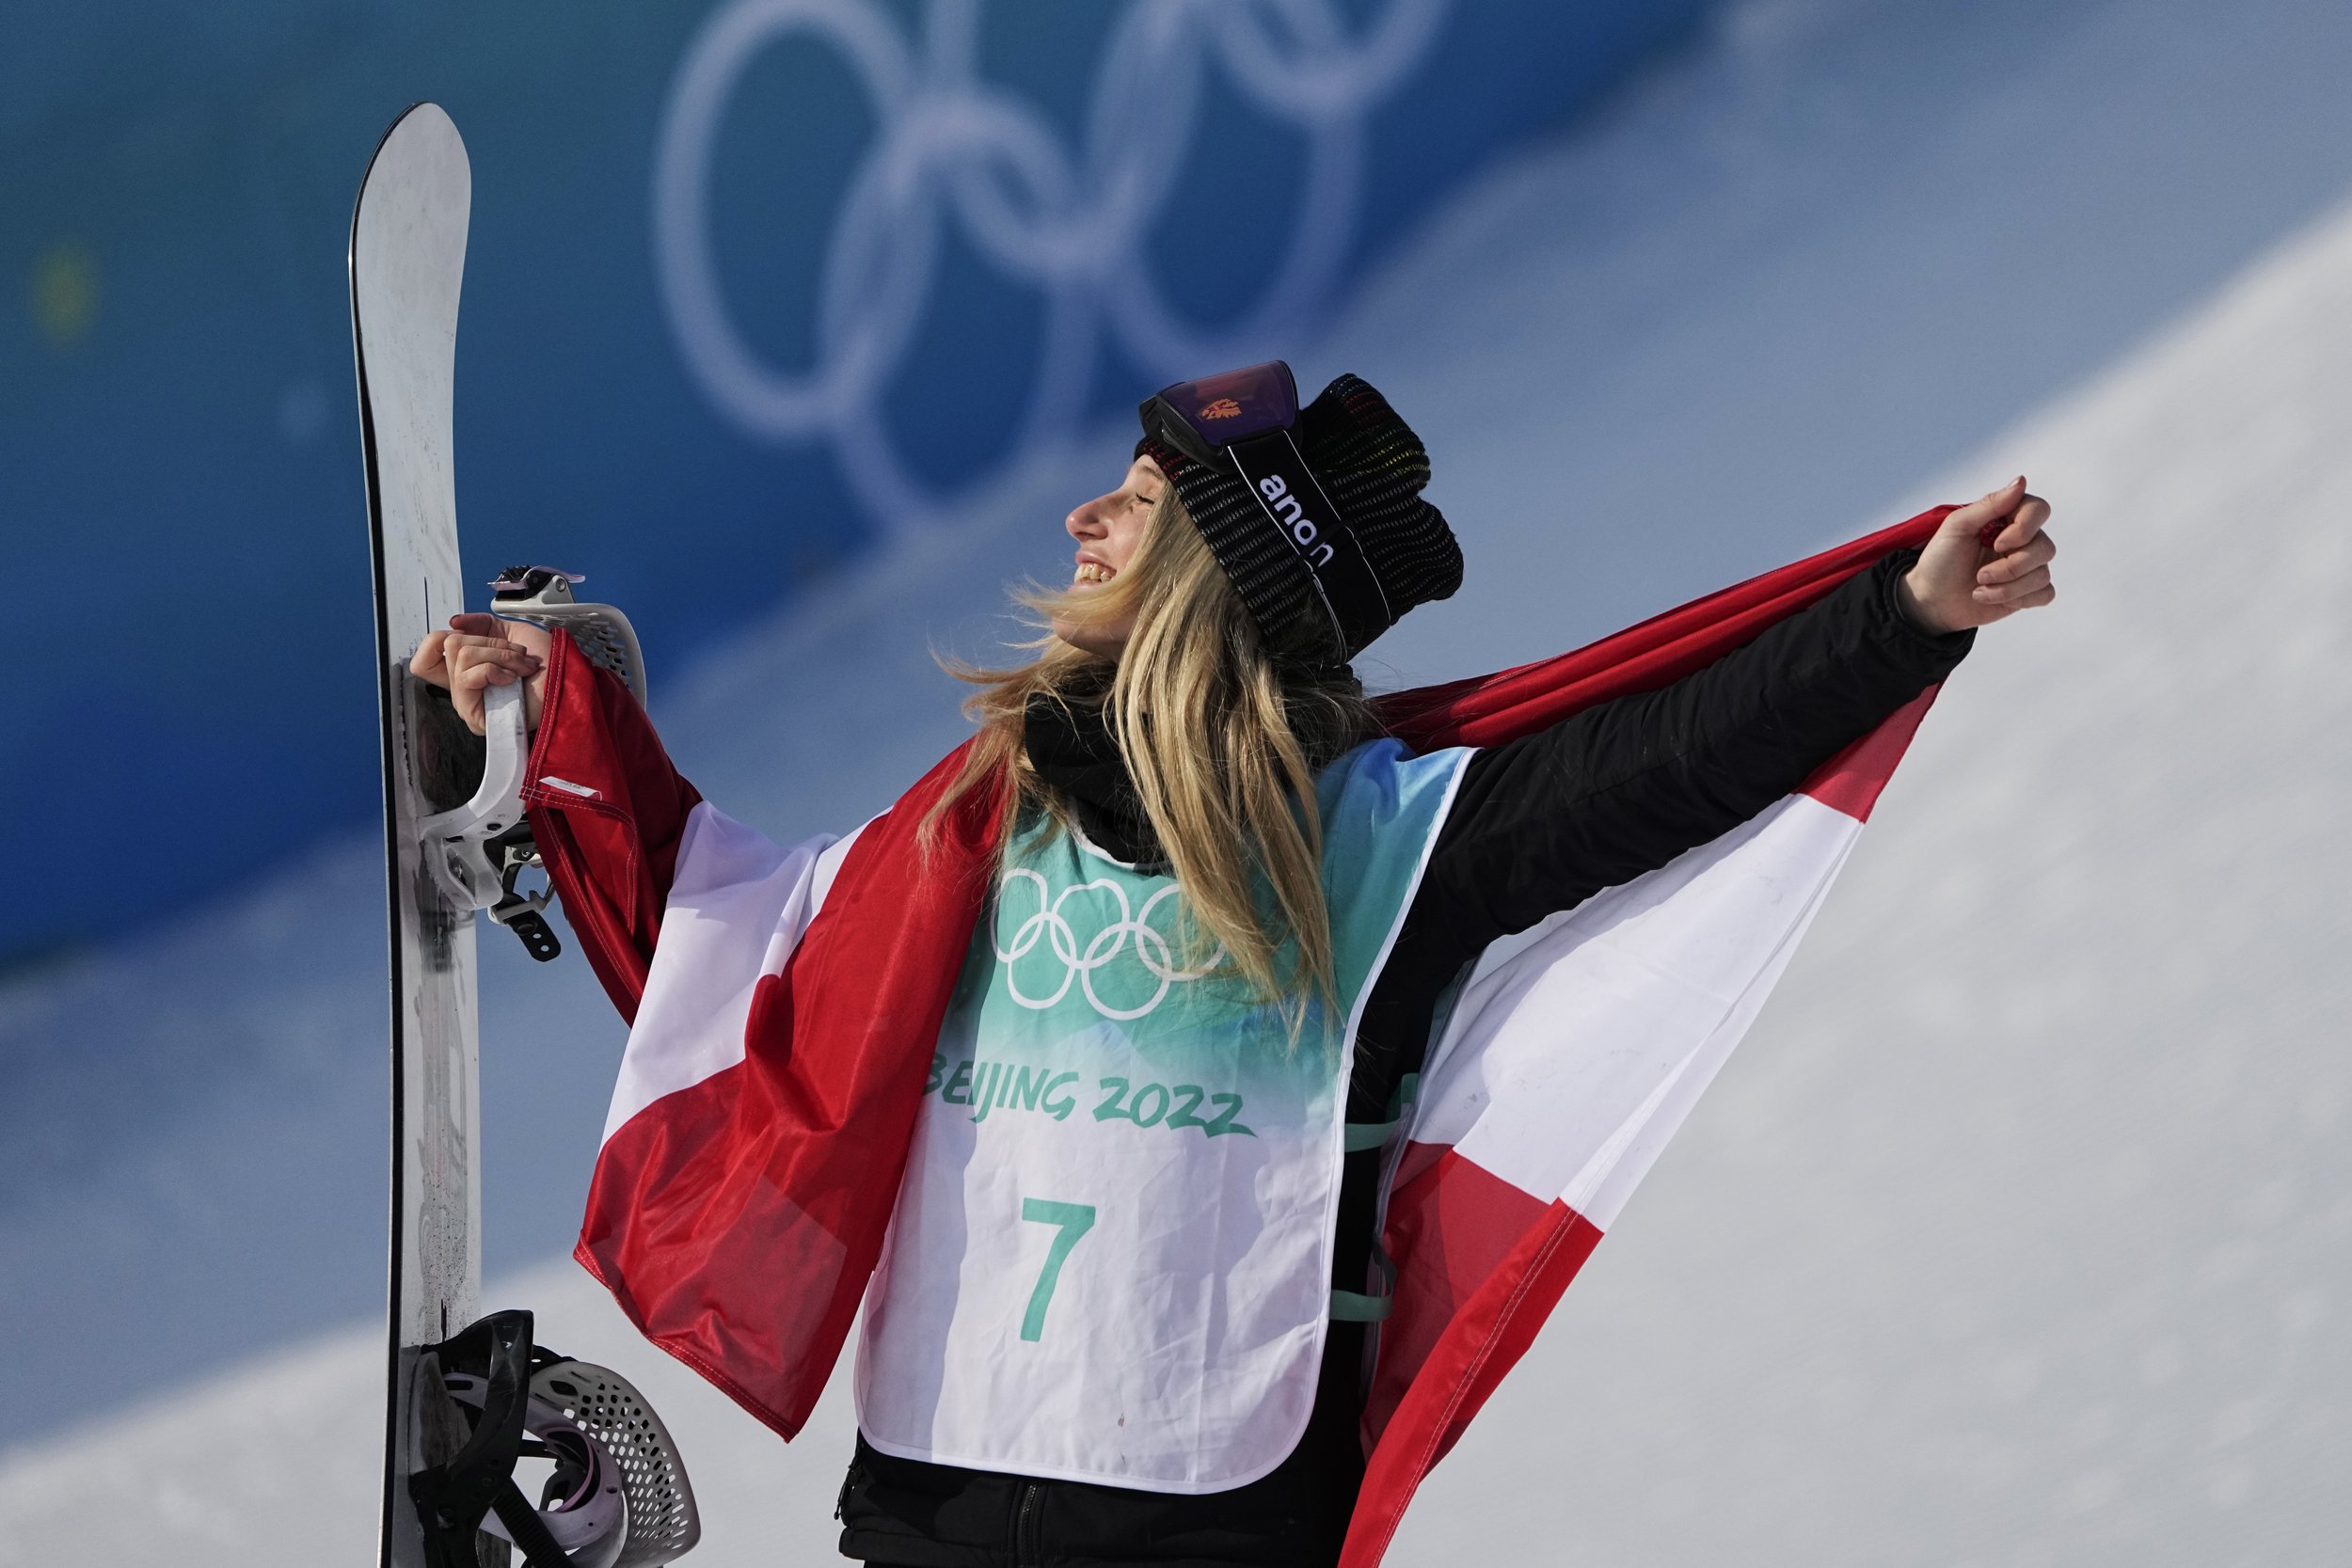  Gold medal winner Anna Gasser of Austria poses during a venue ceremony for the women's snowboard big air finals of the 2022 Winter Olympics, Tuesday, Feb. 15, 2022, in Beijing. (AP Photo/Jae C. Hong) 